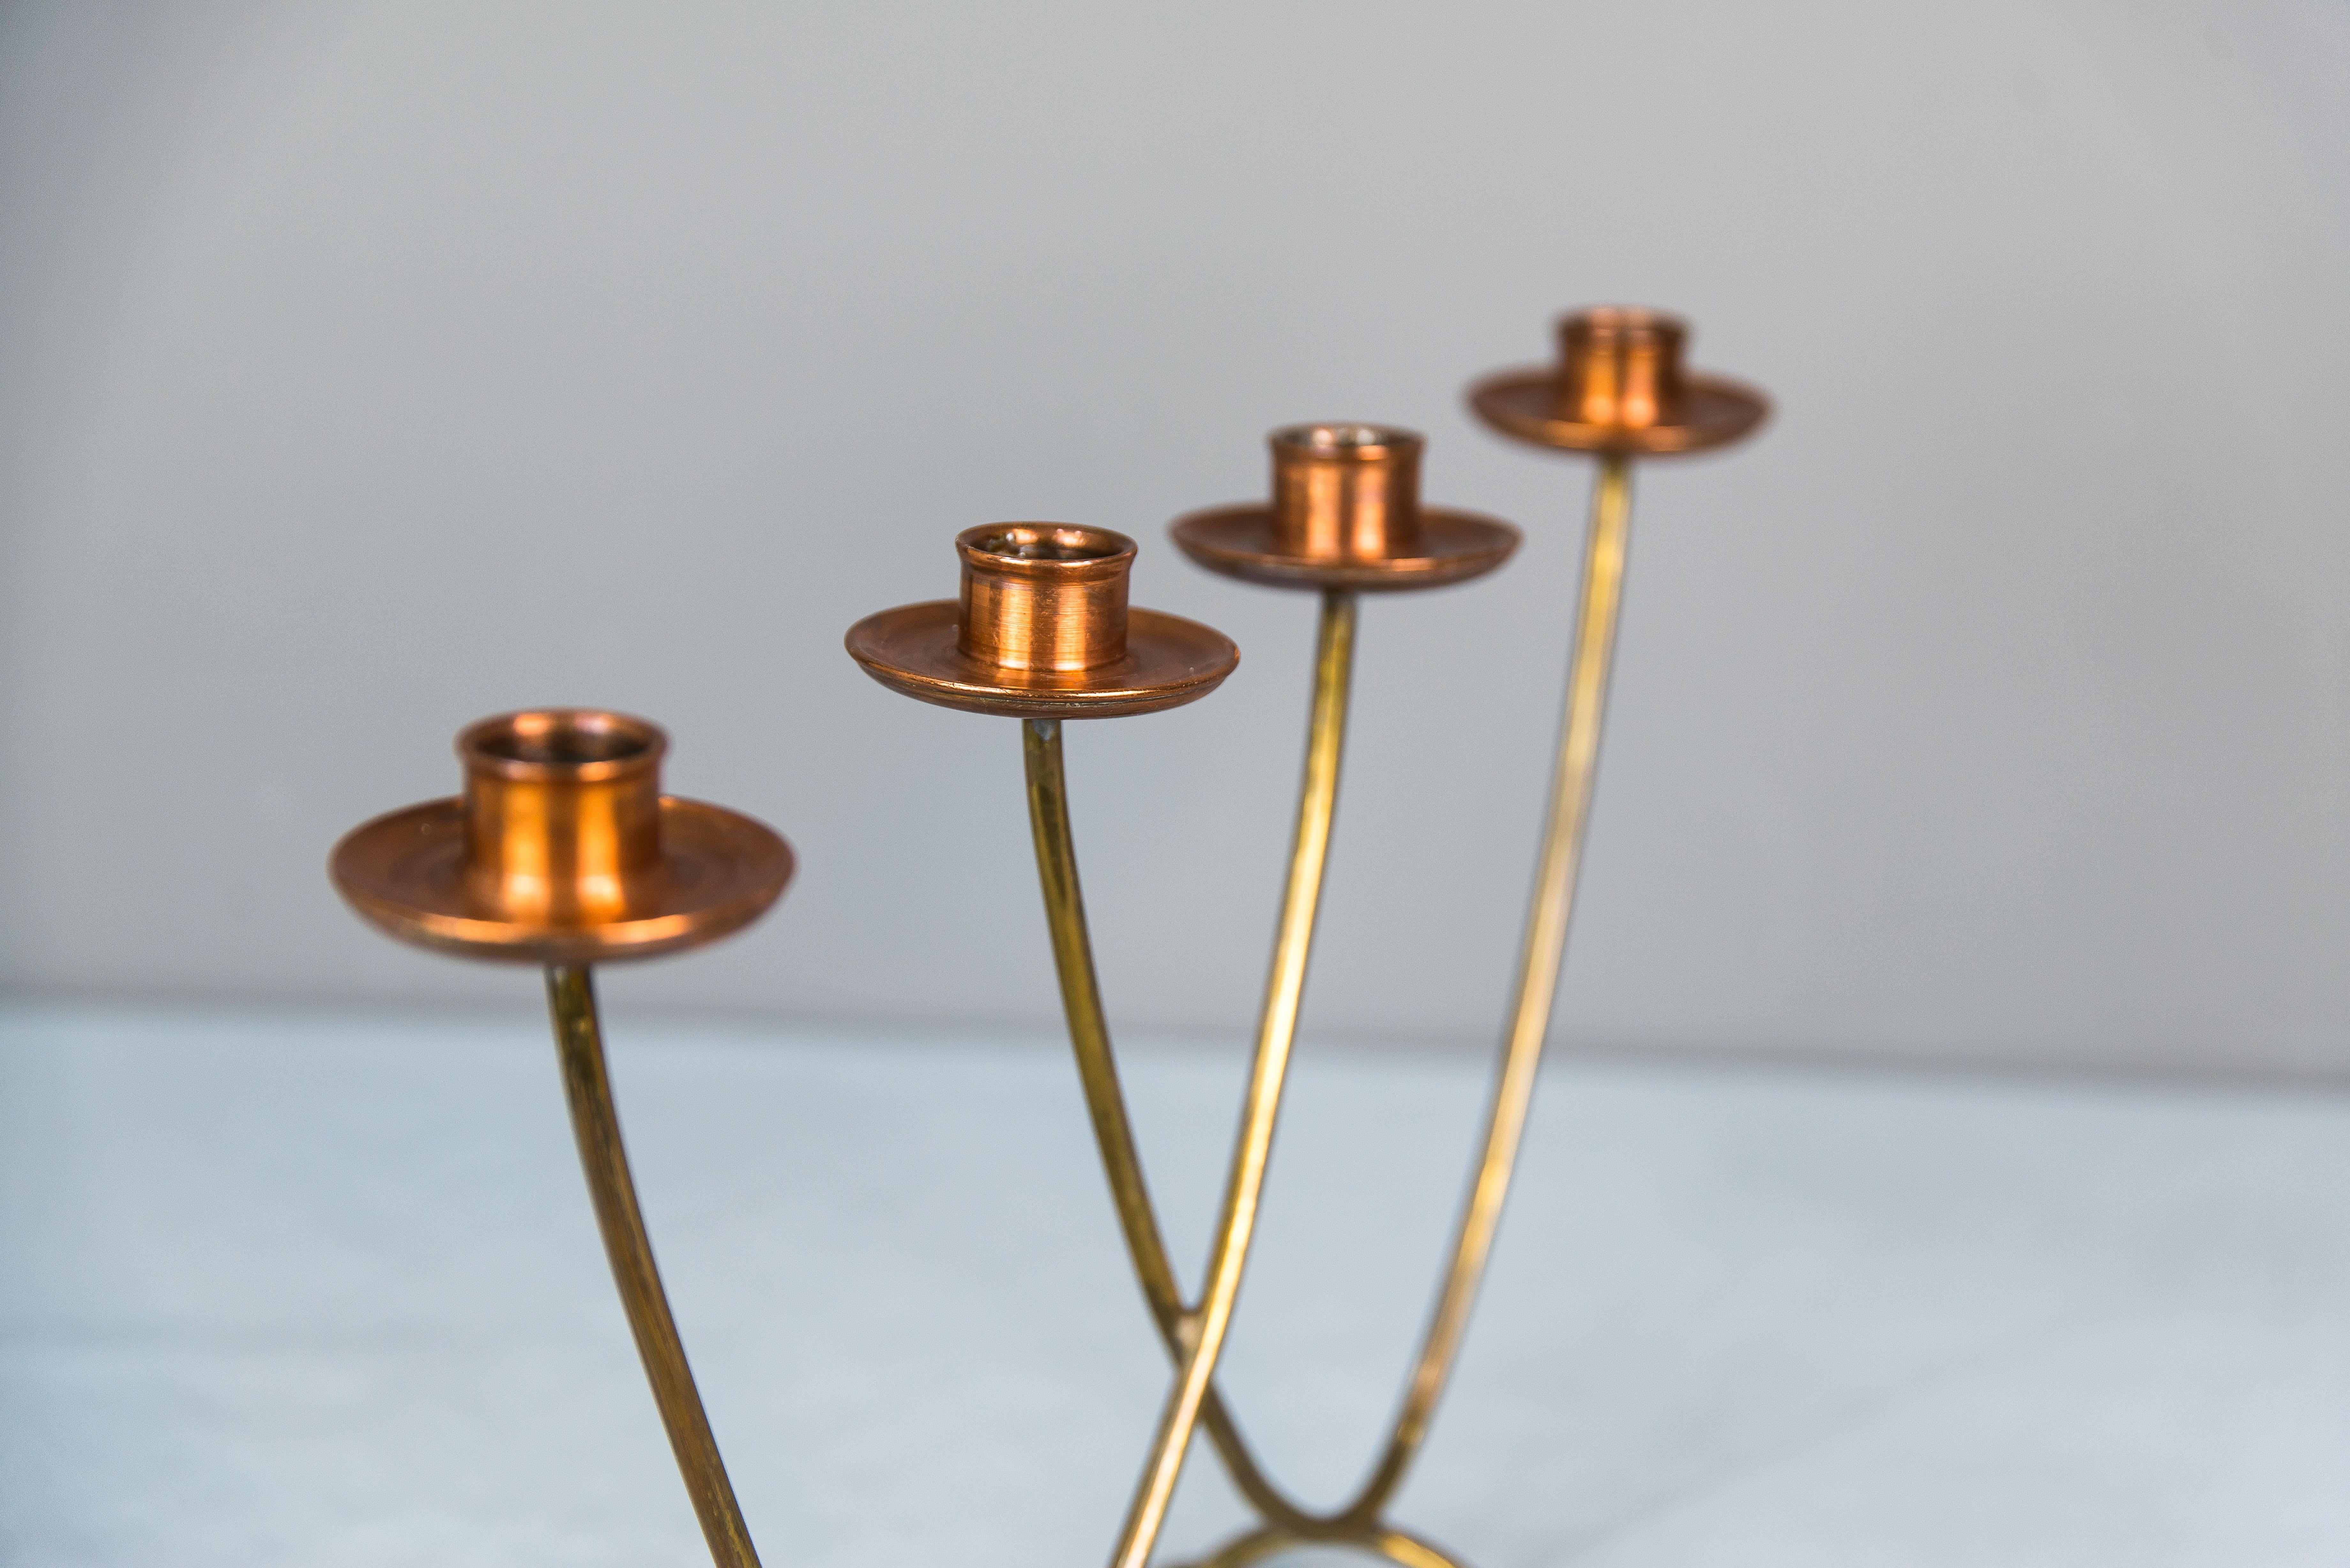 Candleholder for 4 Candles Execution in Copper and Brass, circa 1950s For Sale 1